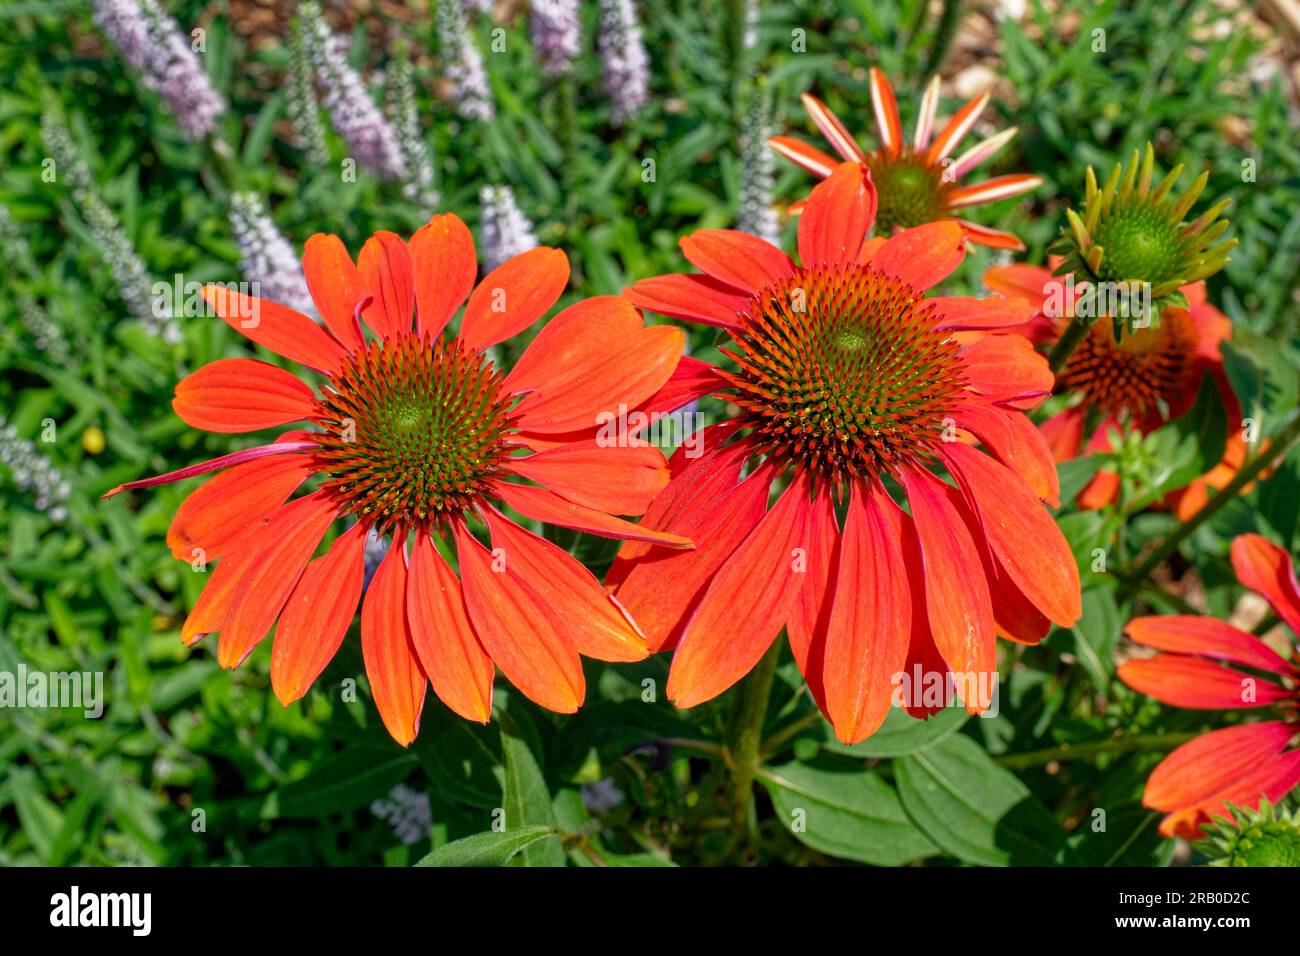 Deep orange or light red color coneflowers some fully opened in the foreground closeup view with other garden plants in the background on a sunny day Stock Photo